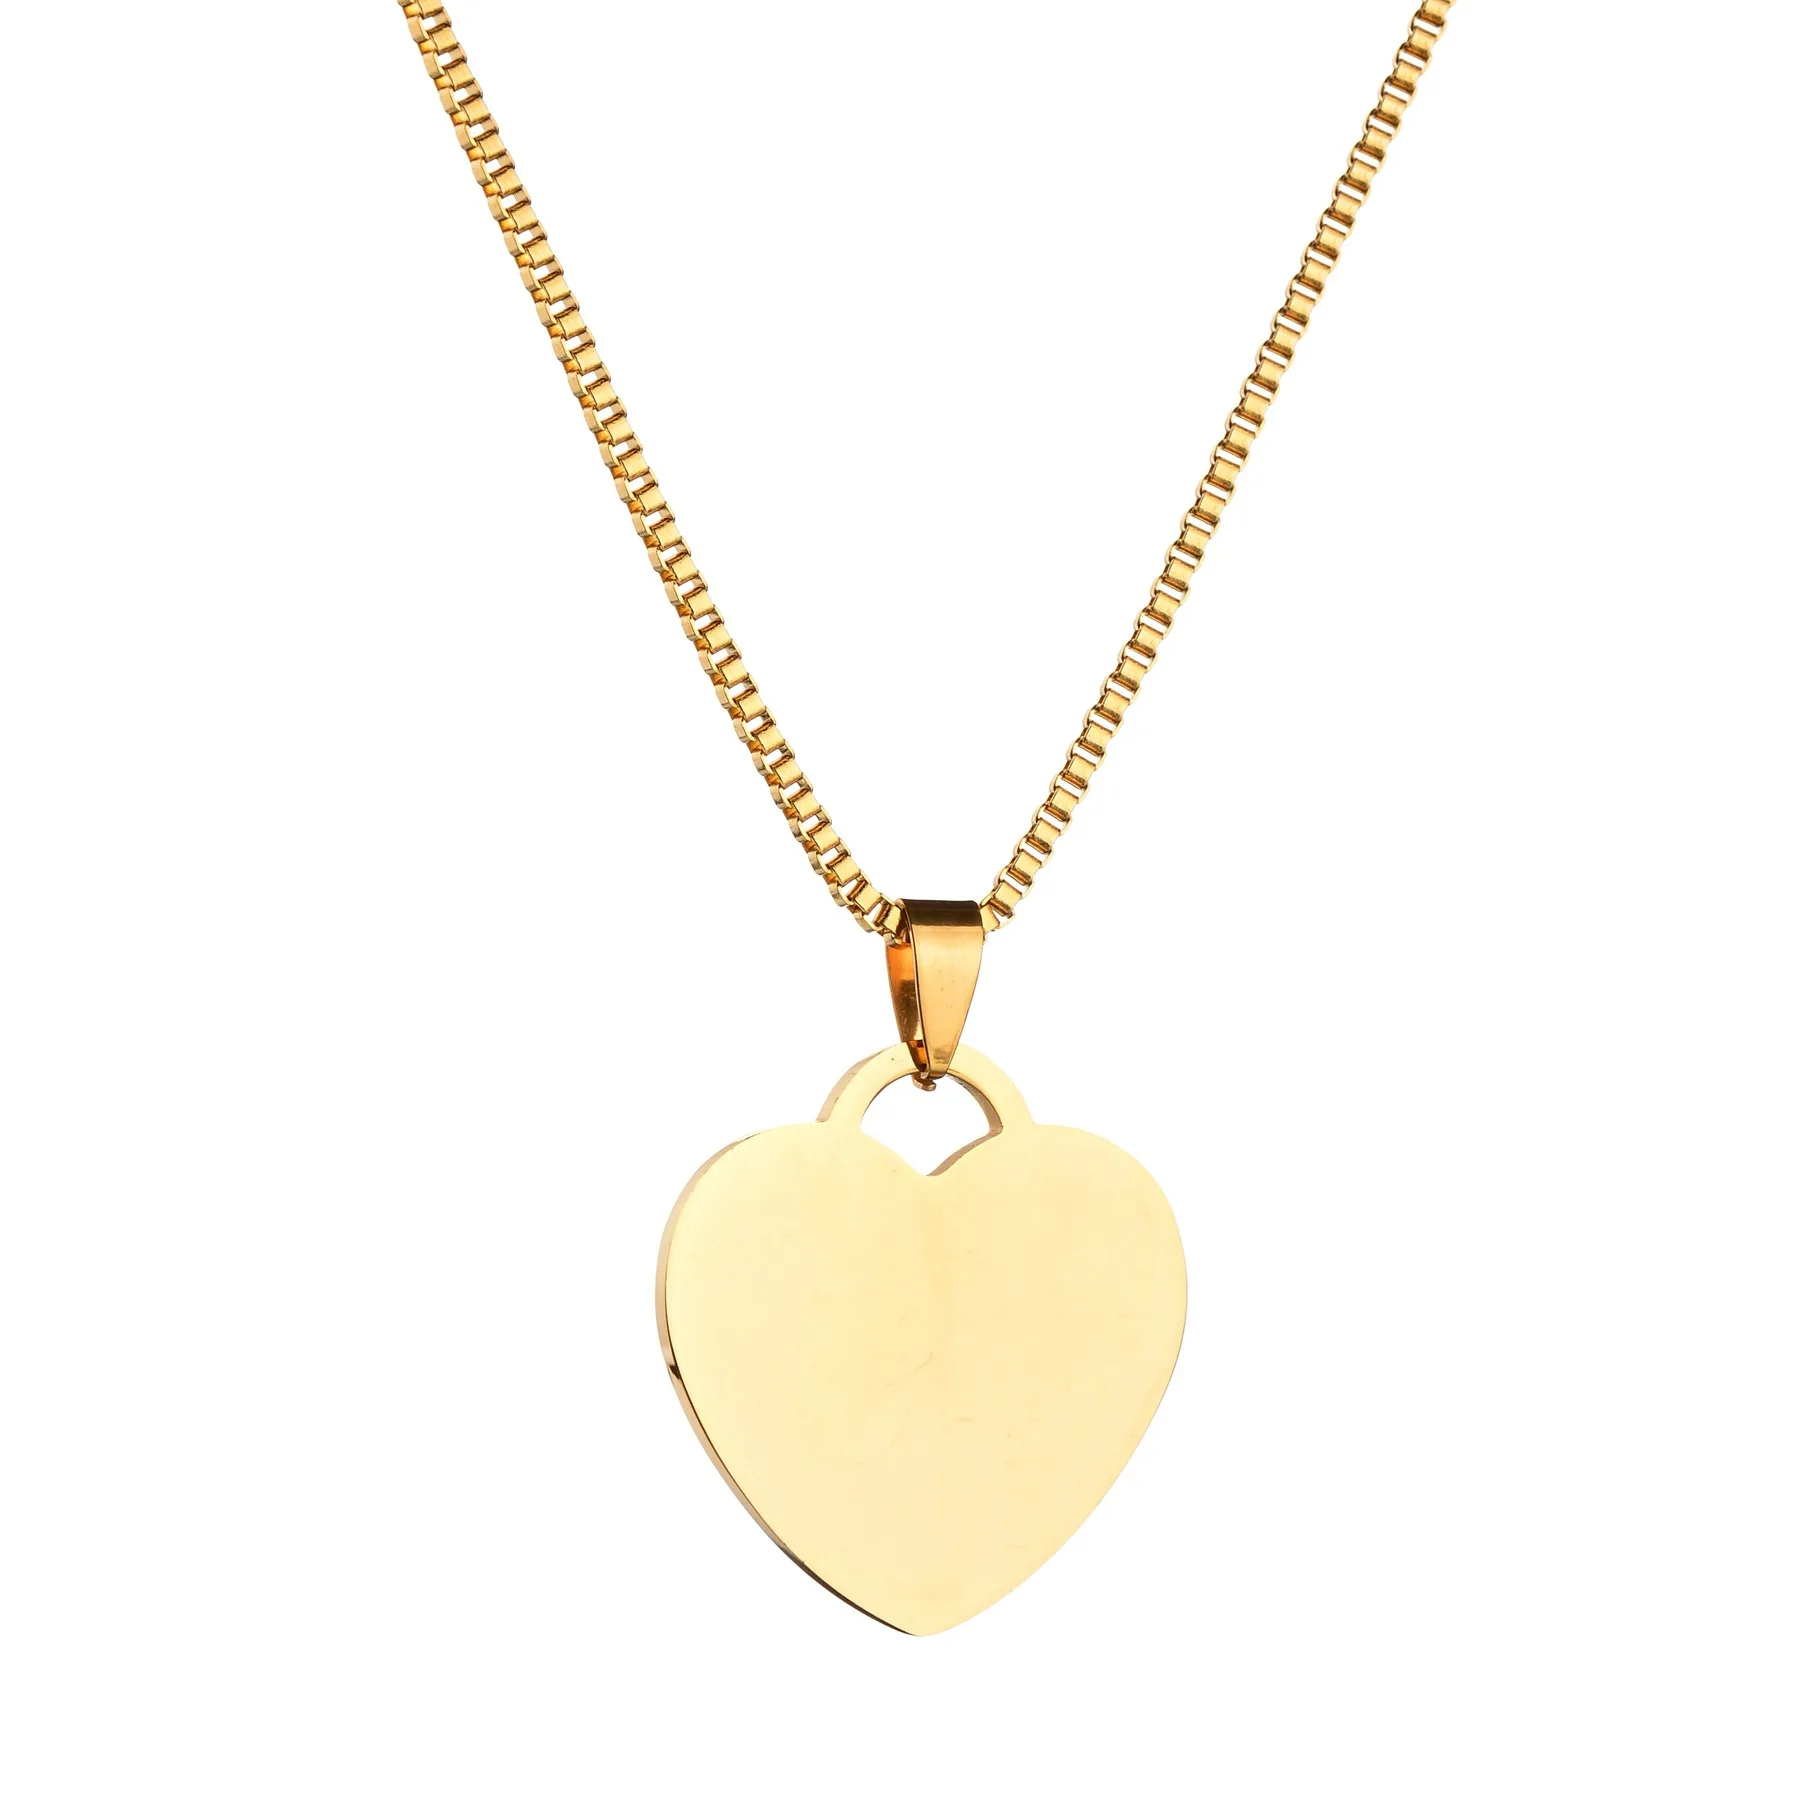 custom necklace gold plated stainless steel heart pendant necklace custom dog tags nameplate necklace